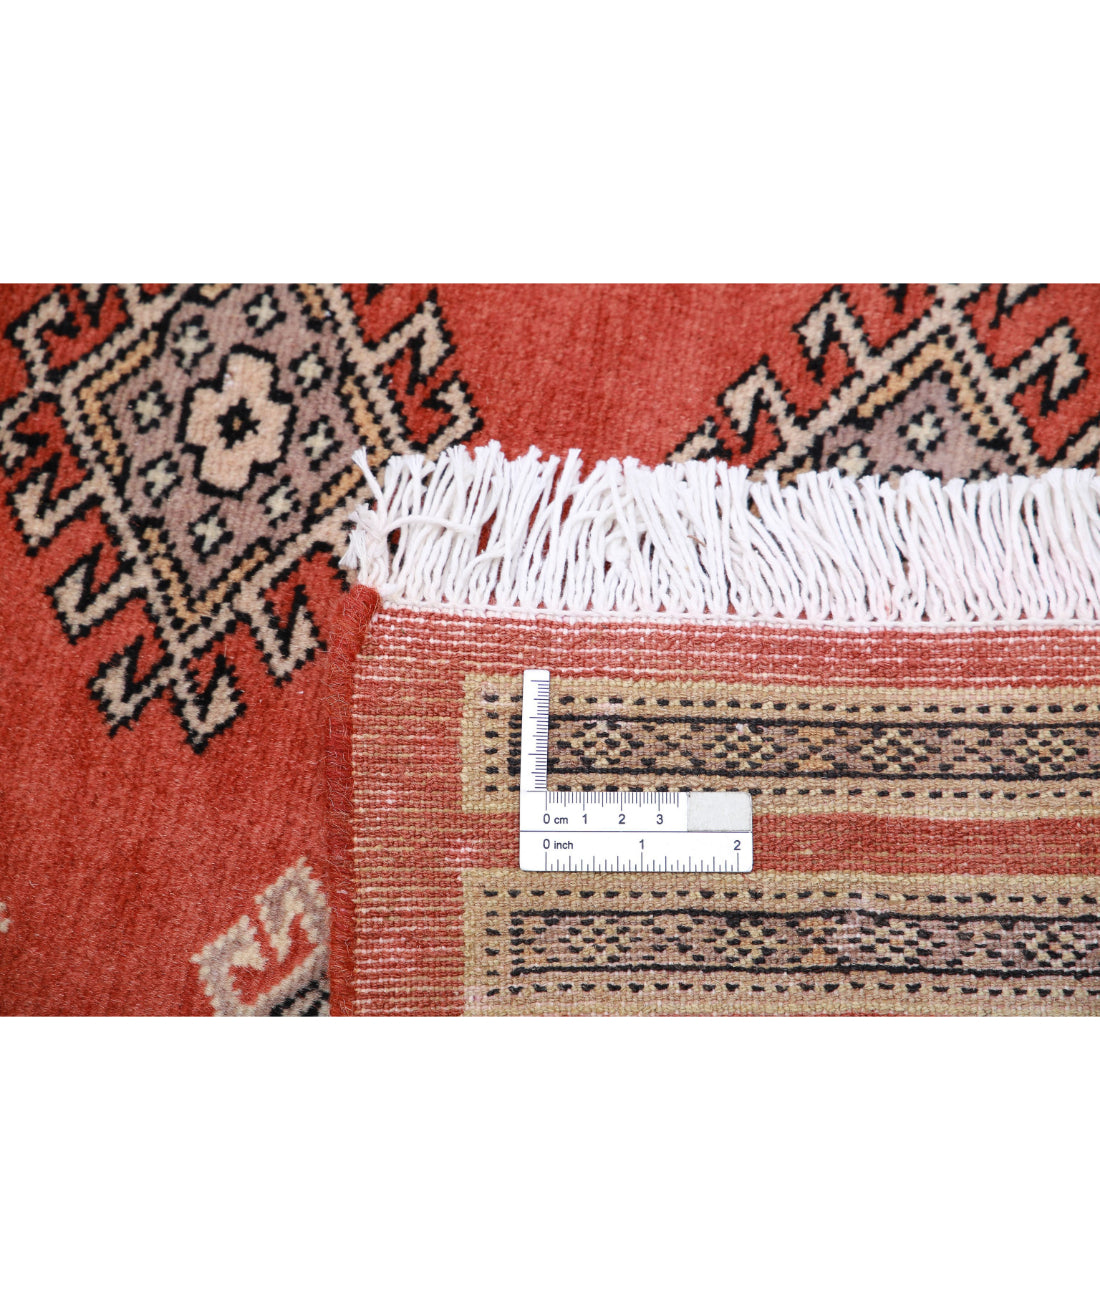 Hand Knotted Tribal Bokhara Wool Rug - 6'6'' x 10'0'' 6'6'' x 10'0'' (195 X 300) / Rust / Taupe